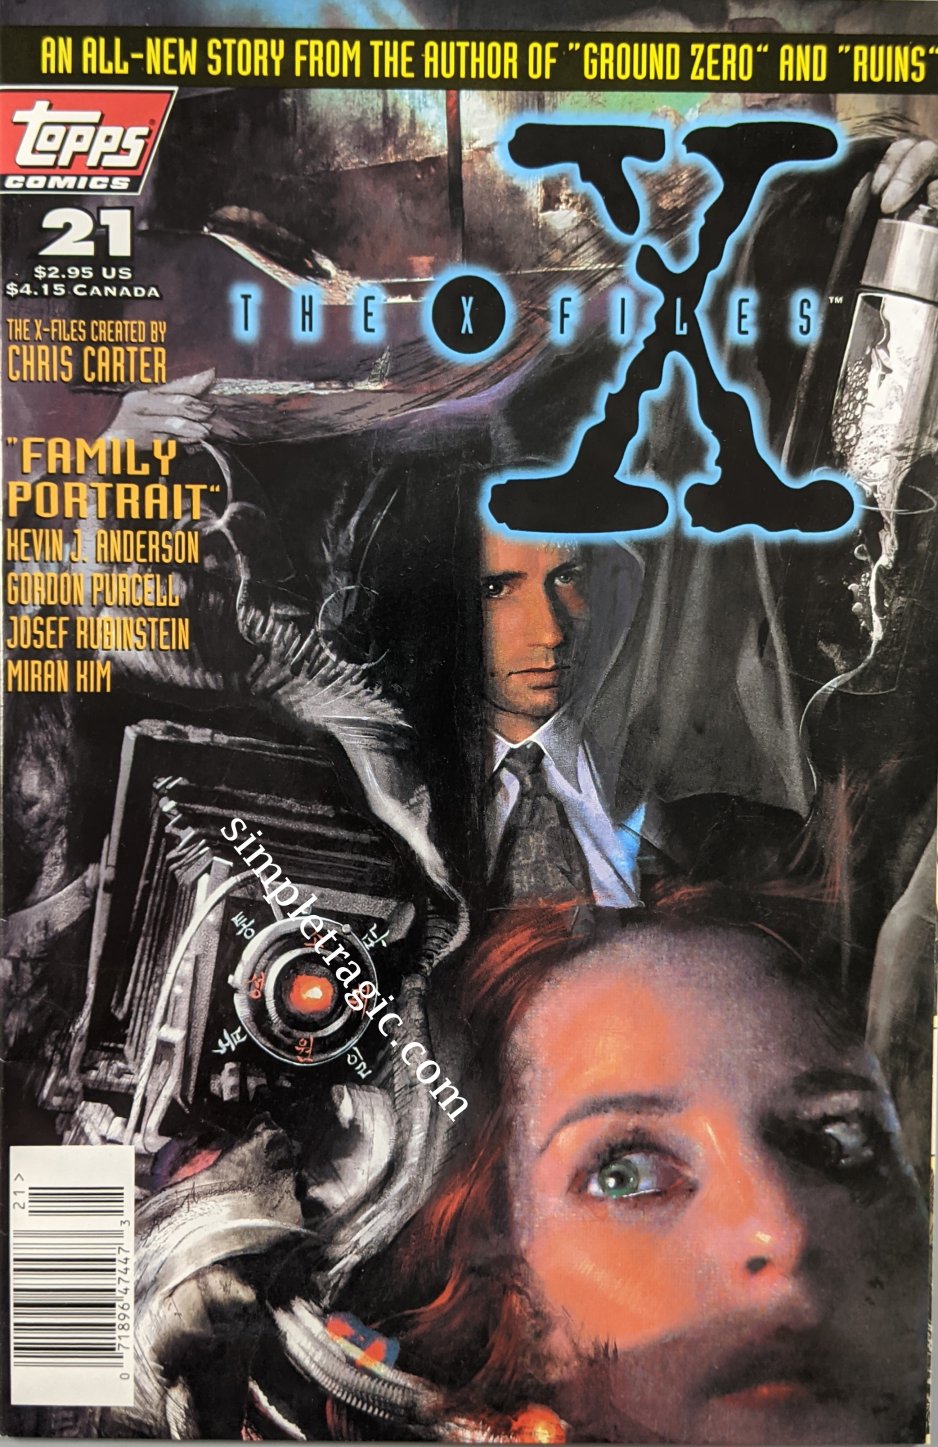 X-Files, The (1995) #21